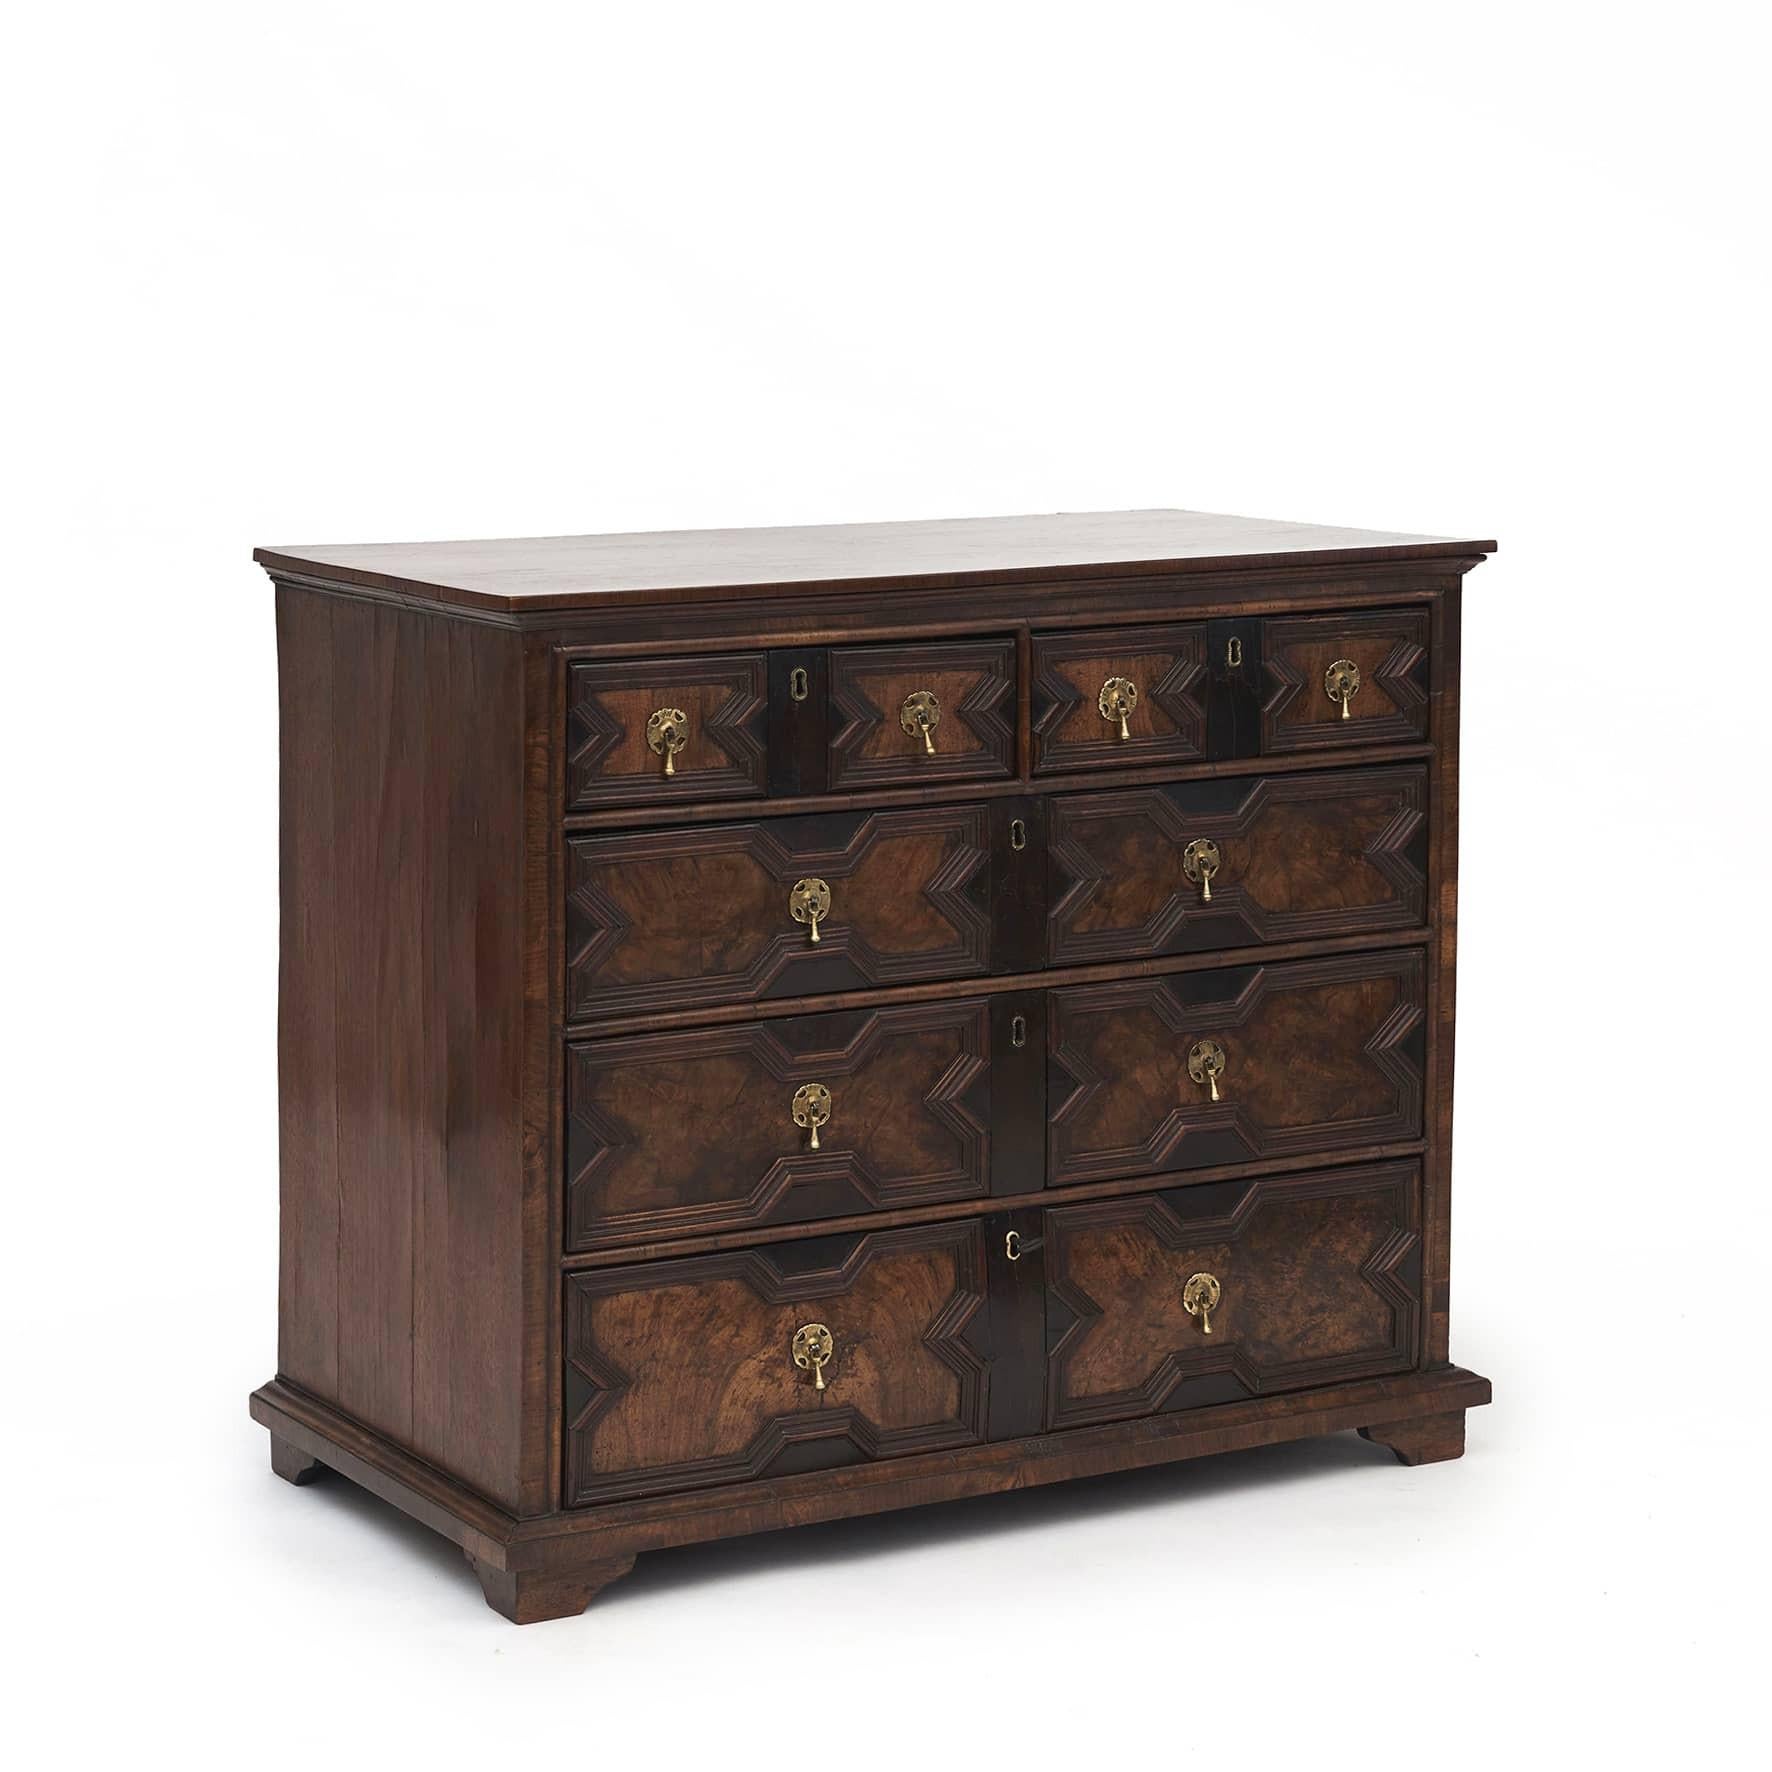 English walnut and oak Jacobean chest of drawers.
With five drawers: two smaller drawers at the top and three larger drawers below. Oak and ebony paneling and molding to all drawer fronts. Drawer bottoms i walnut. Top and sides in